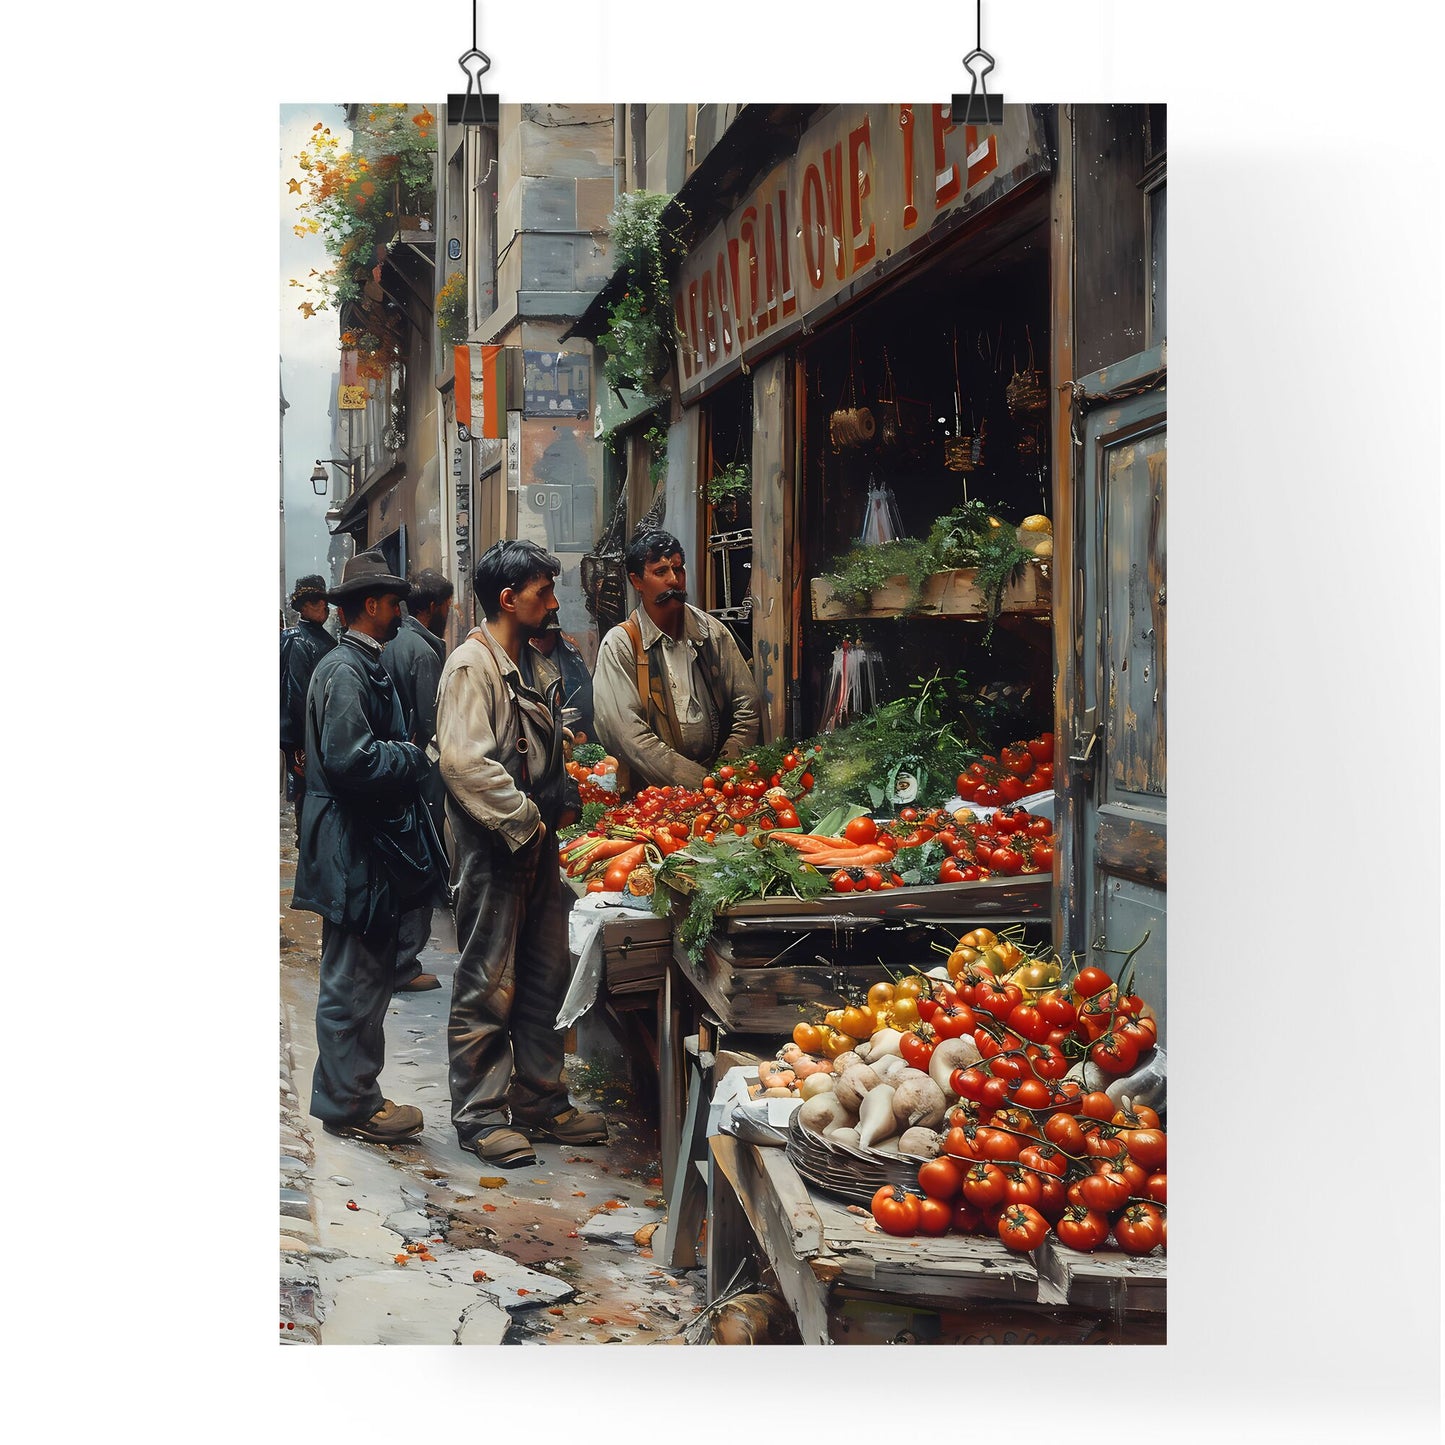 19th Century French Paris Market Street Scene, City Life, Painting, Art, Market View, People Come and Go, Vegetable Stand, Men Default Title